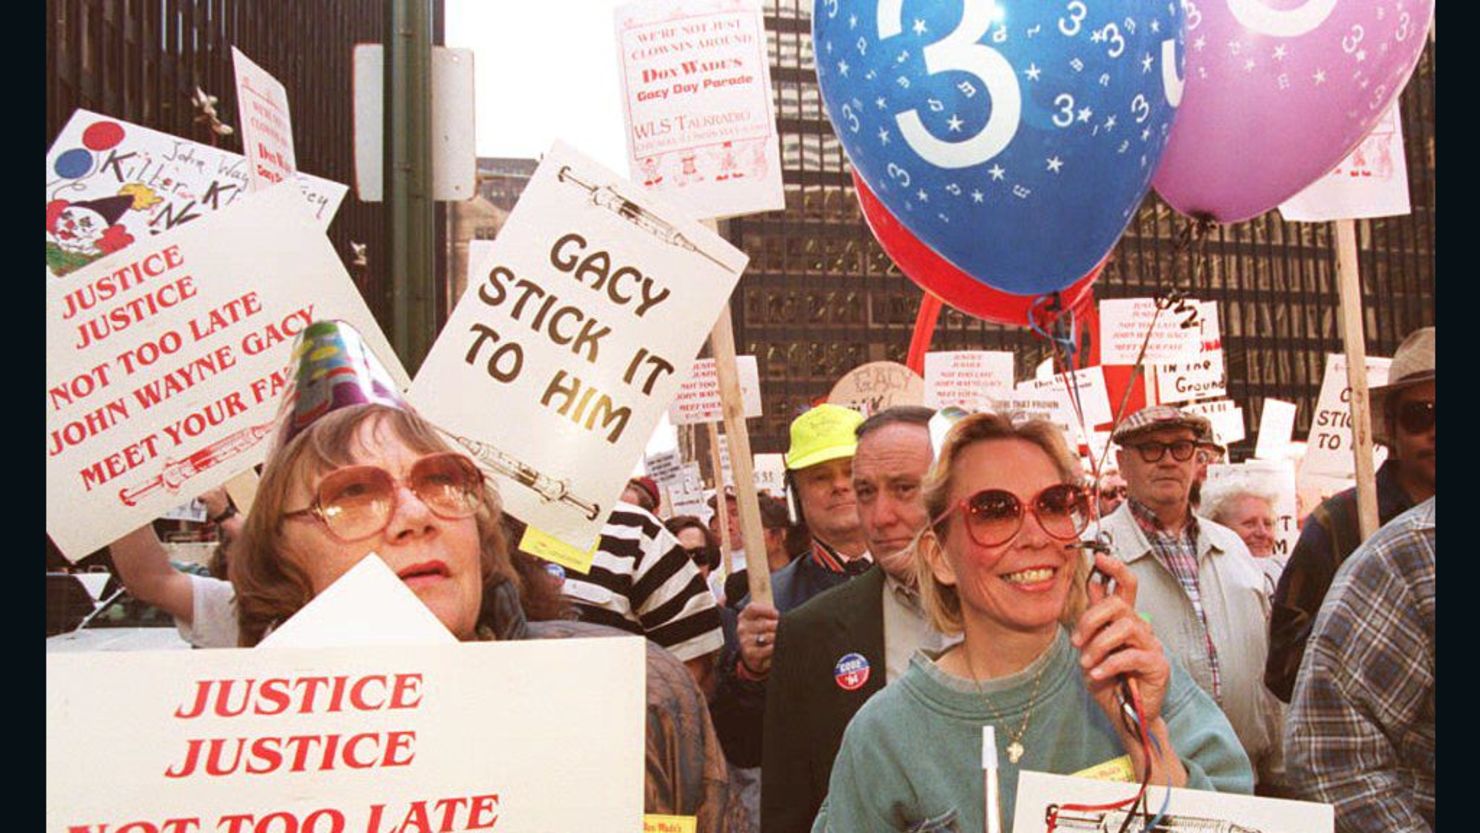 Demonstrators supporting the scheduled execution of  John Wayne Gacy rally in Chicago days before his 1994 execution.